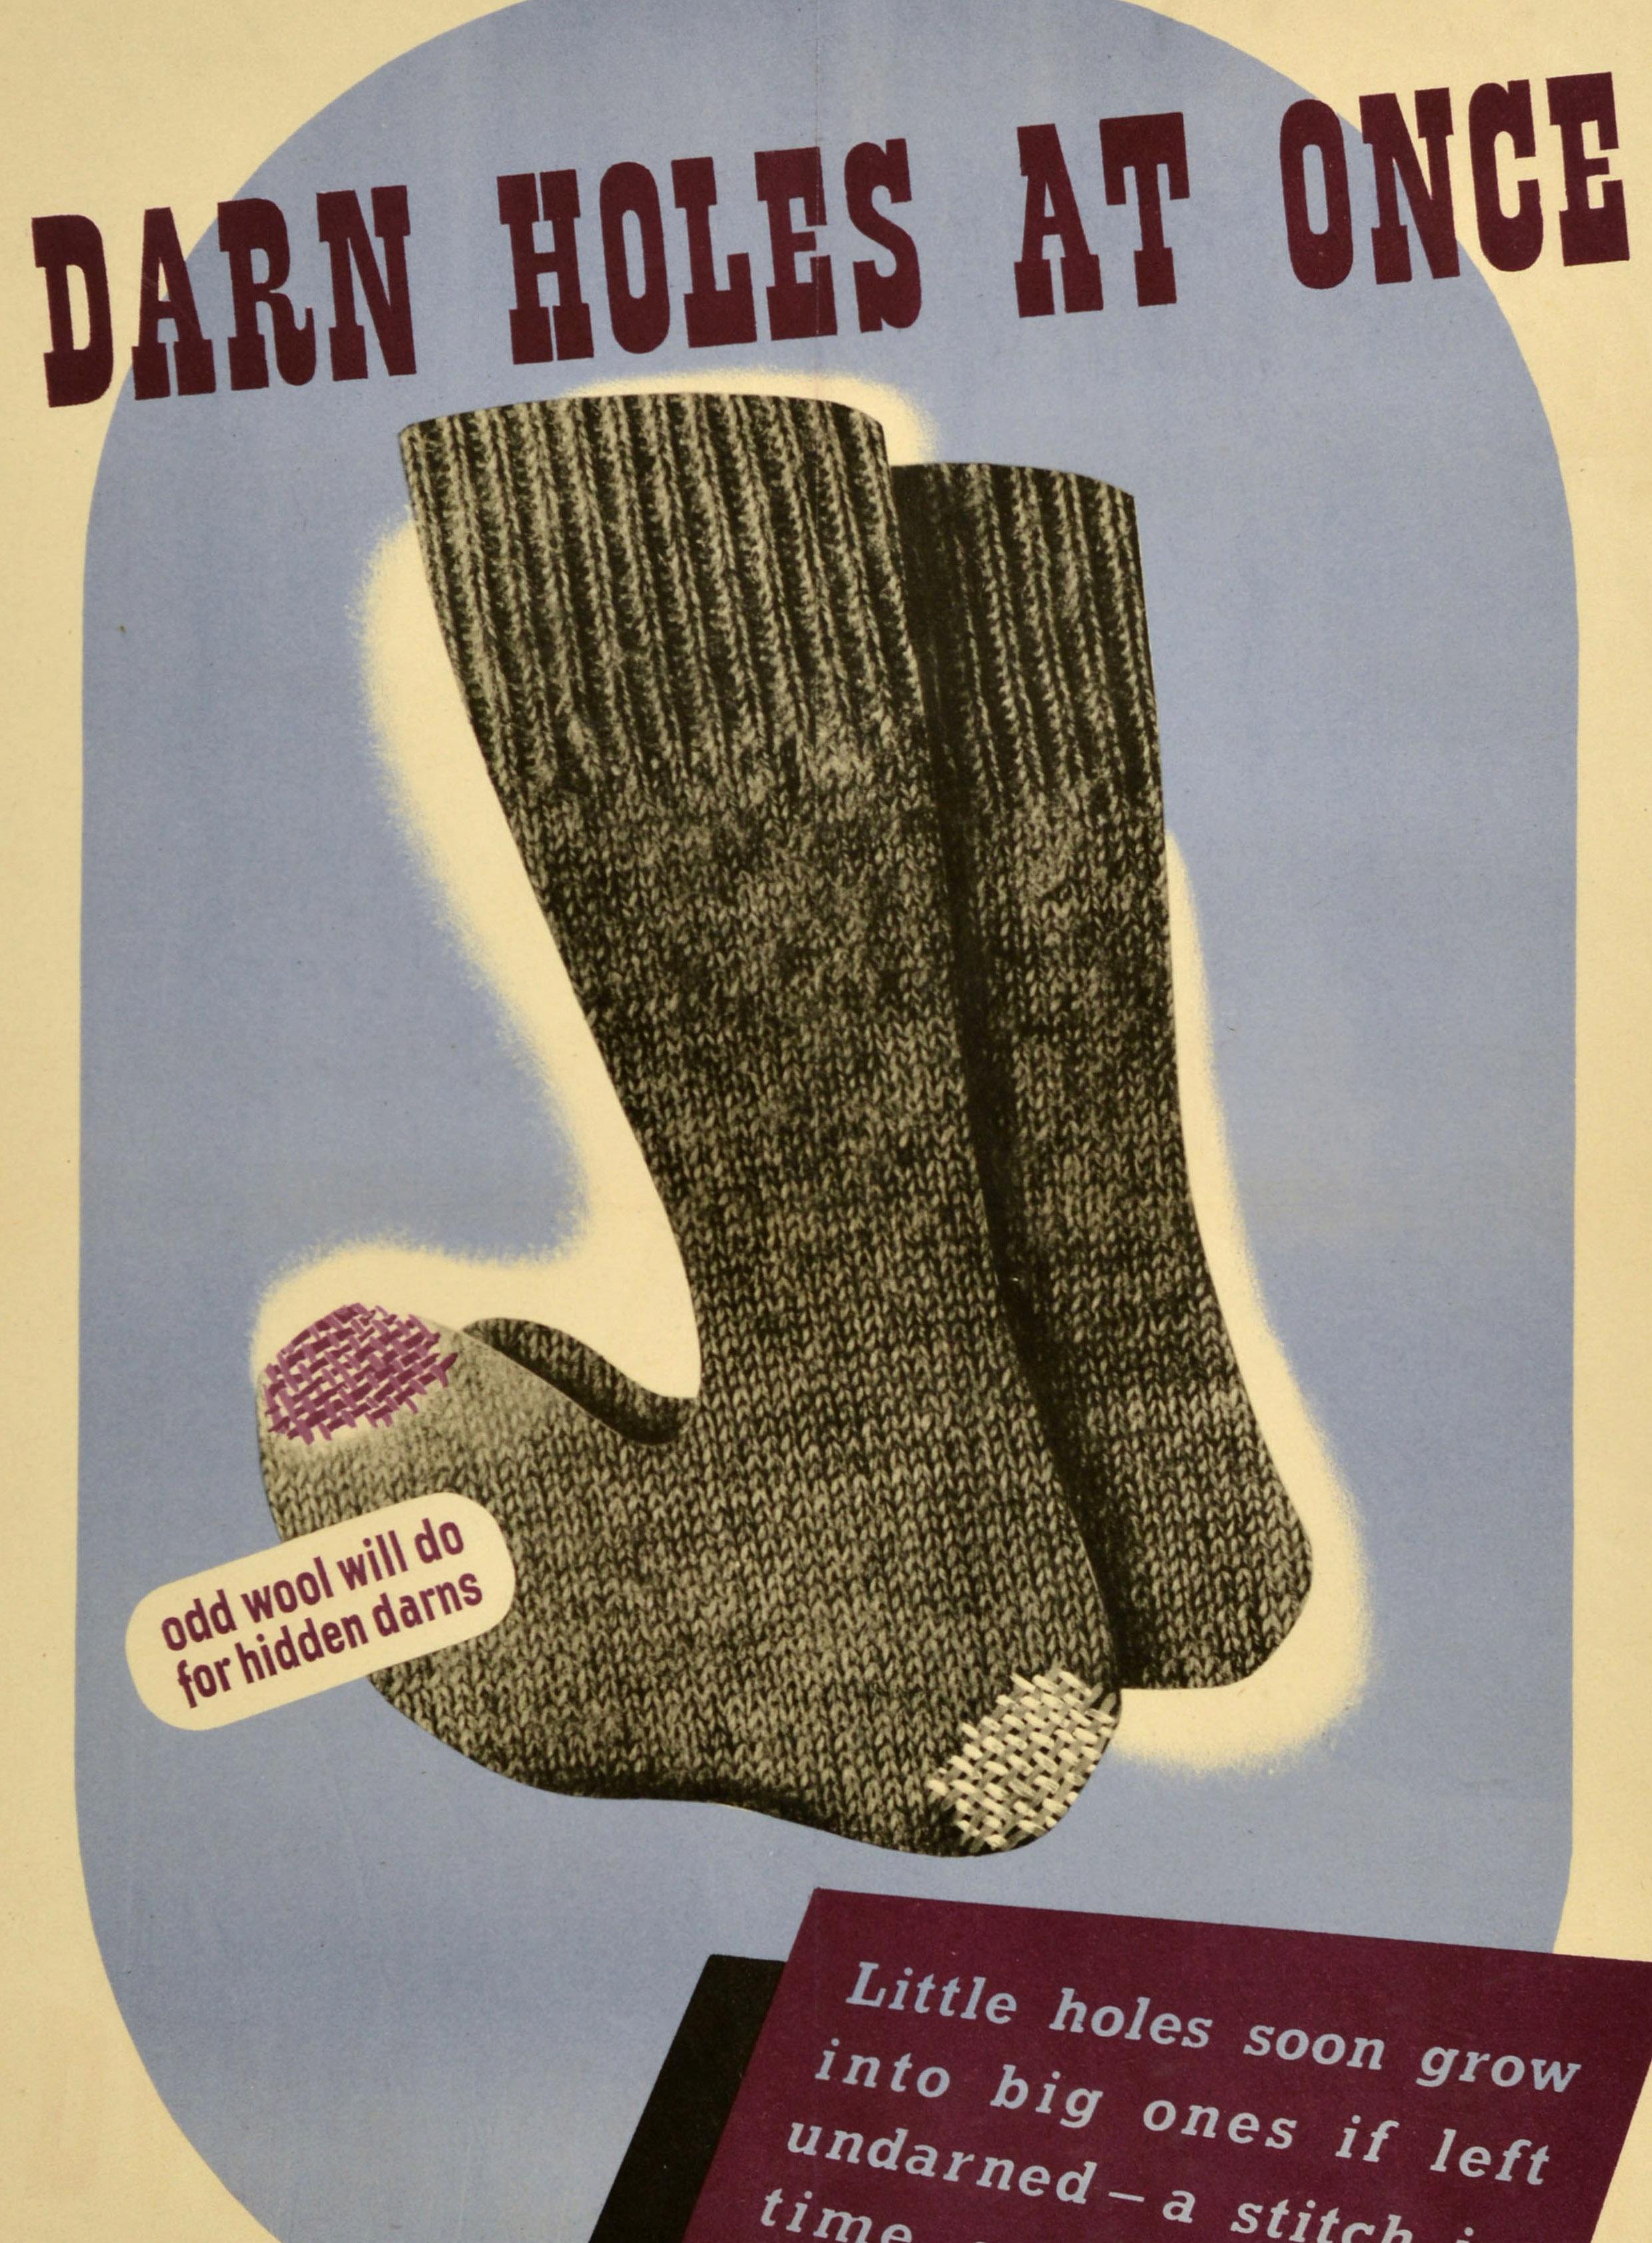 Original Vintage World War Two Propaganda Poster Darn Holes At Once WWII Coupon - Print by Unknown